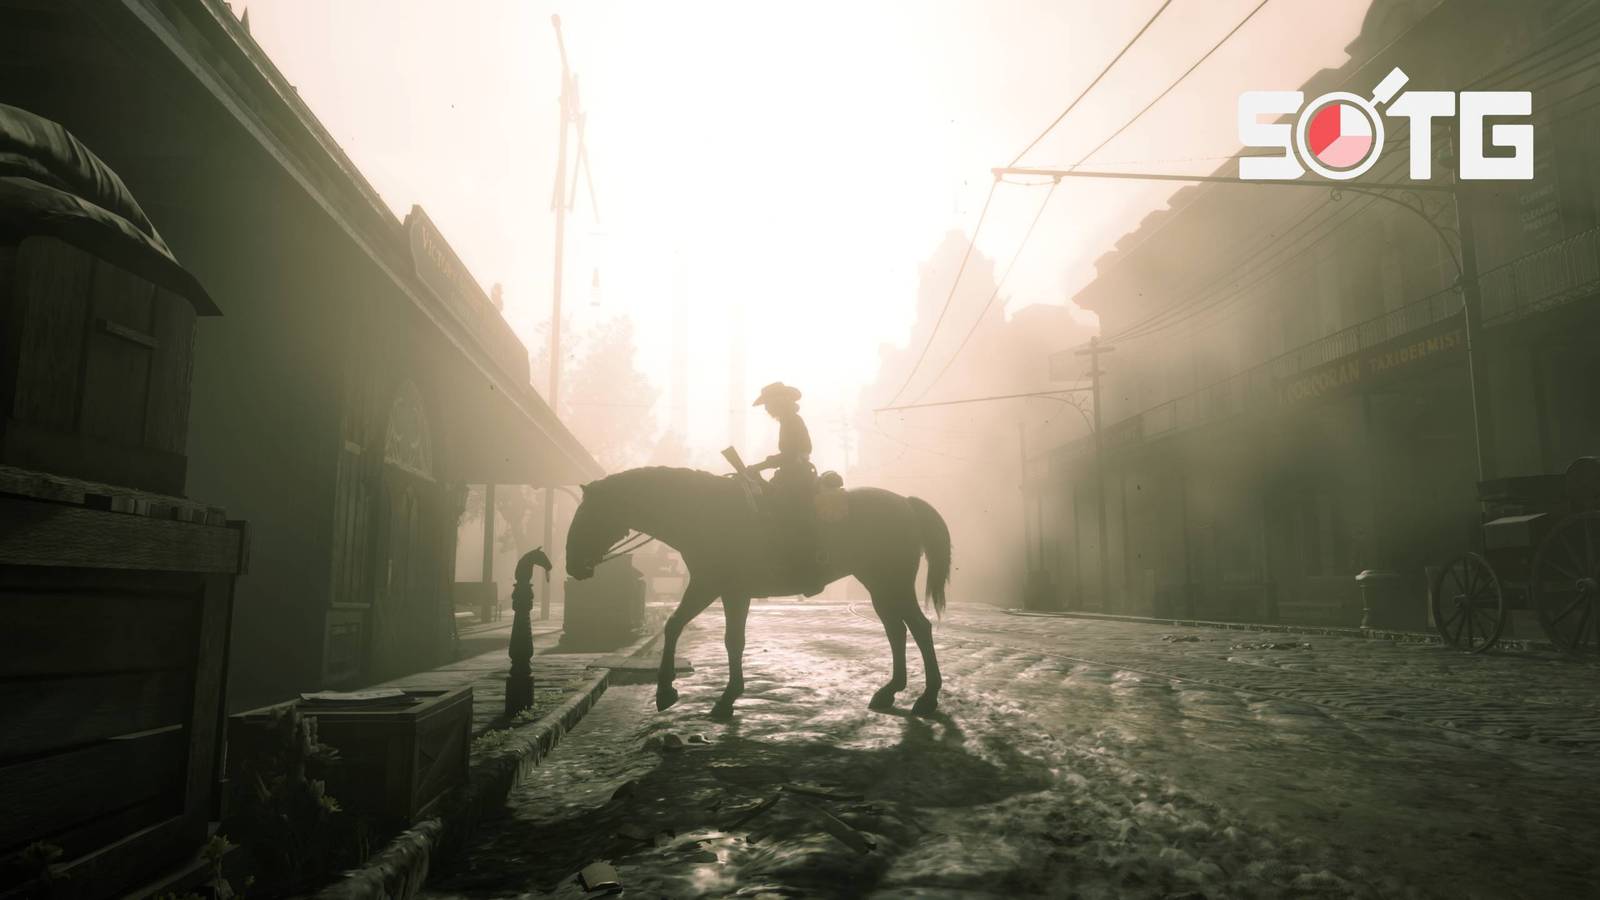 Red Dead Redemption 2 PC release accidentally confirmed by